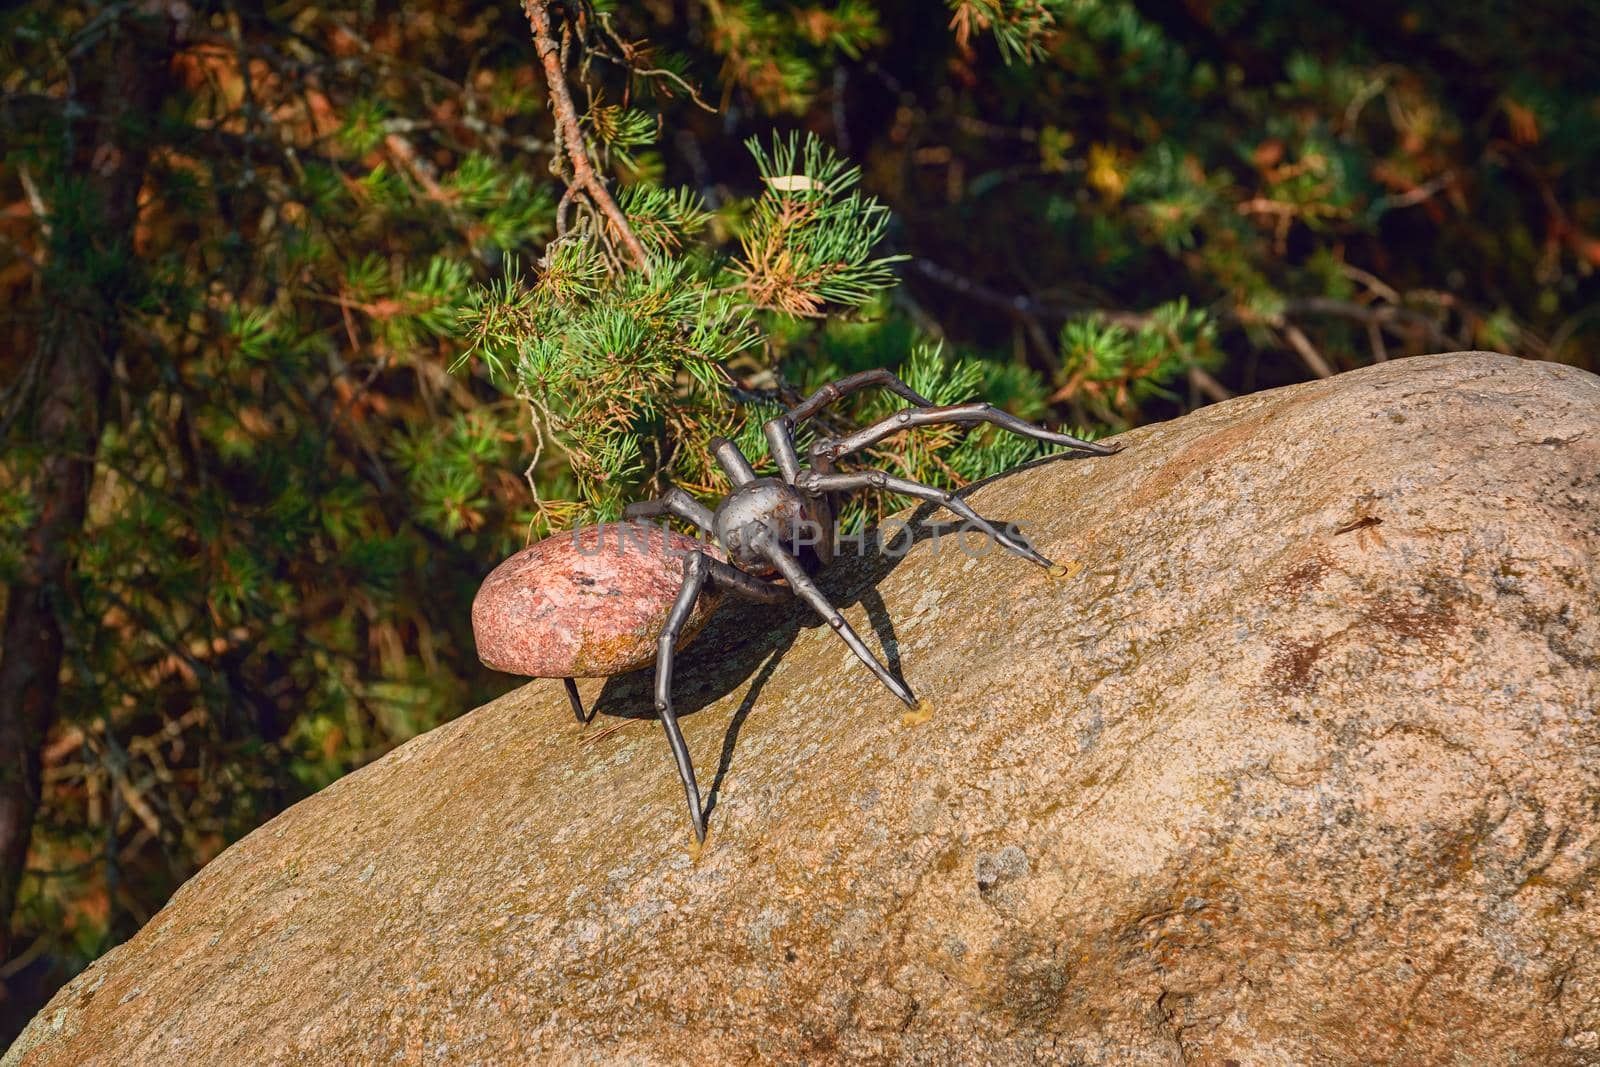 Figurine of a spider by SNR